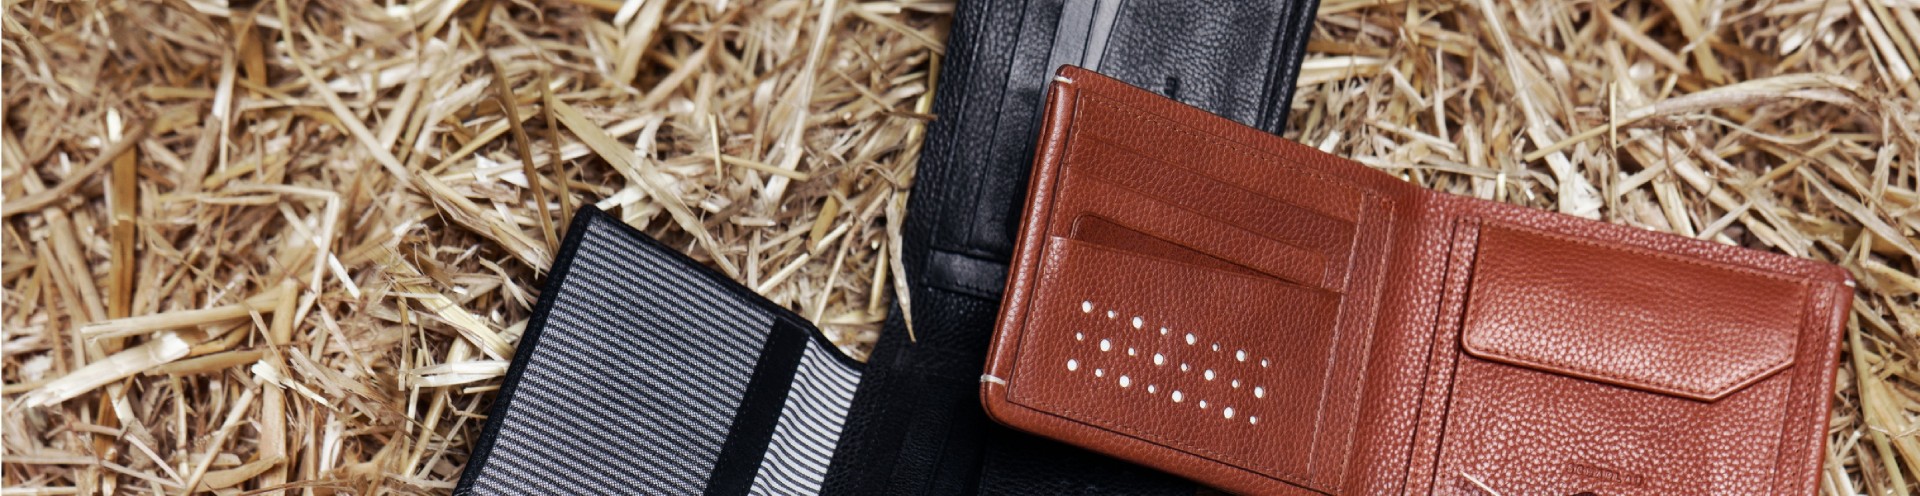 Elegant Wallets and Card Holders with RFID Protection